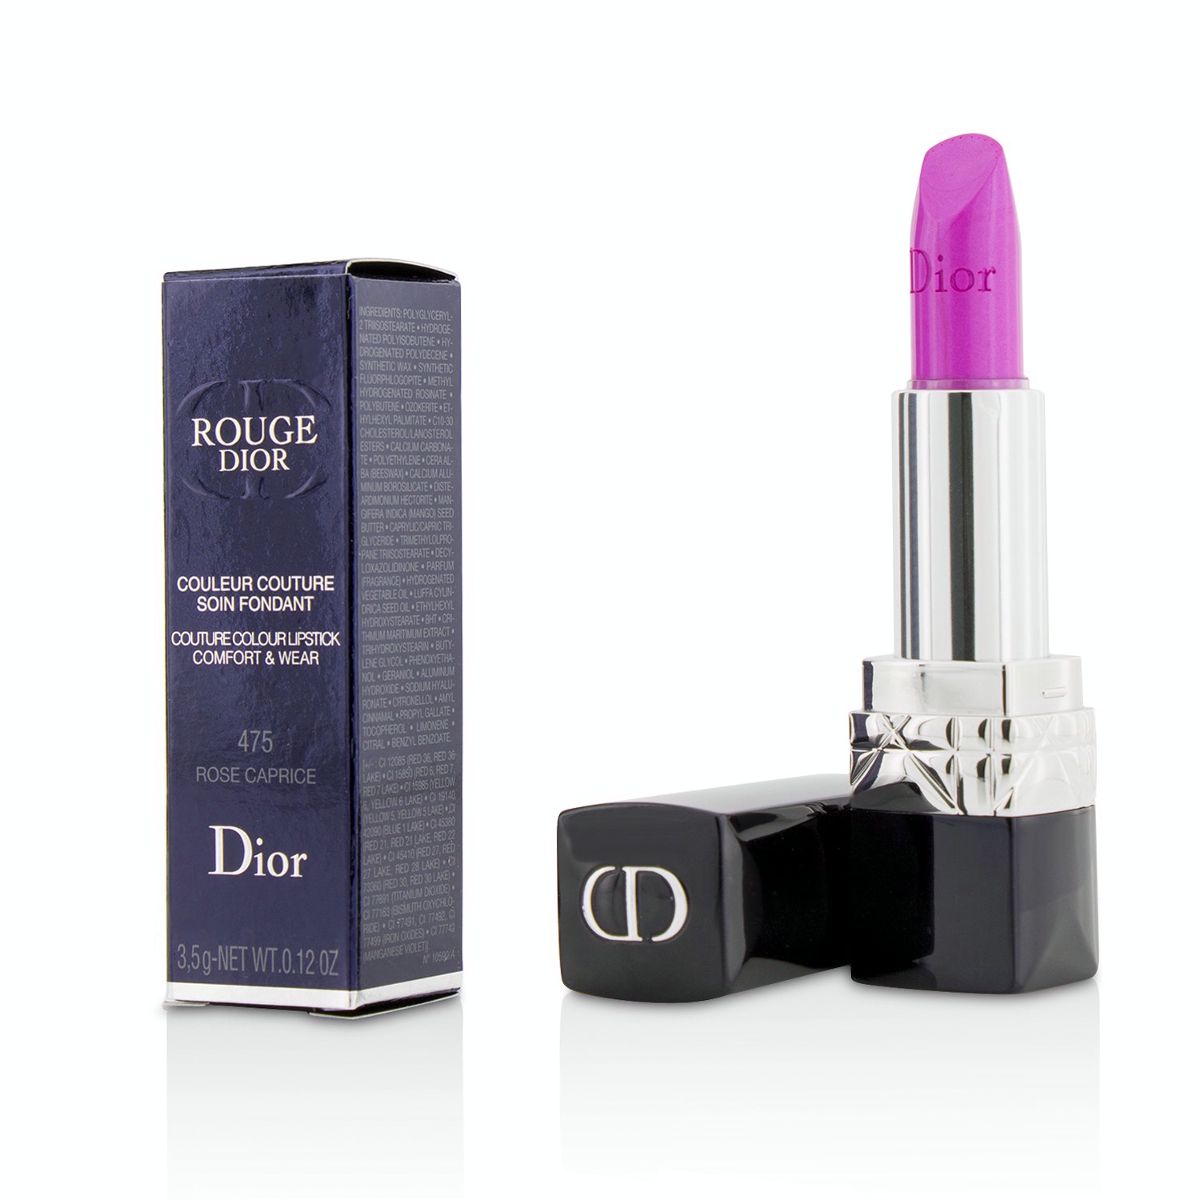 Rouge Dior Couture Colour Comfort  Wear Lipstick - # 475 Rose Caprice Christian Dior Image